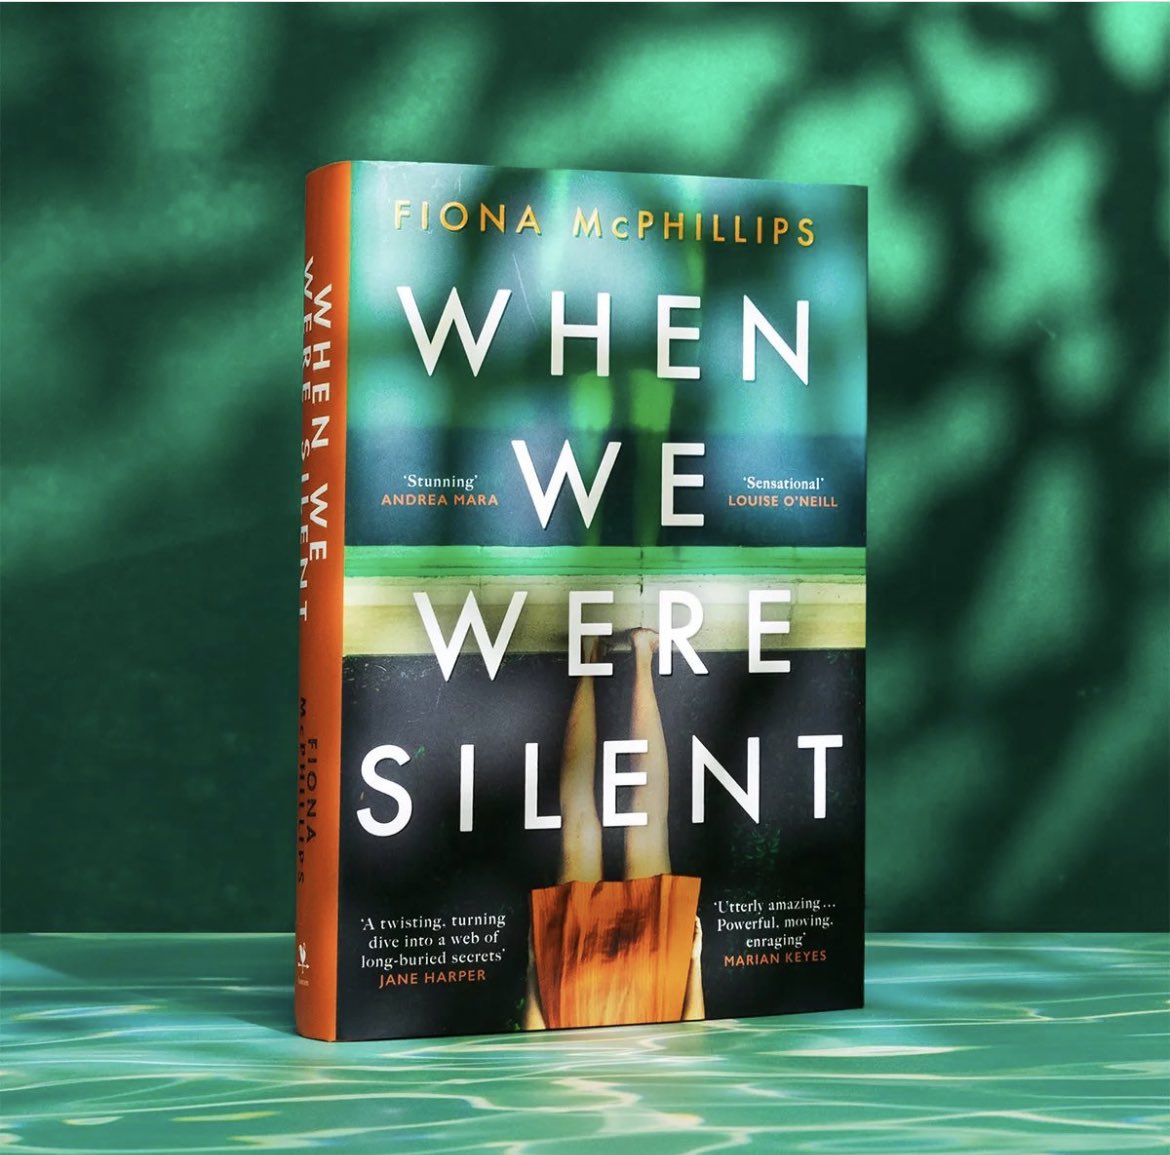 When We Were Silent by @fionamcp is out today! This book is such a compelling read - brave, dark, thought provoking all while keeping you gripped by the plot. I loved Lou - her bravery, fight, and deep connection to her friends stayed with me long after I finished.